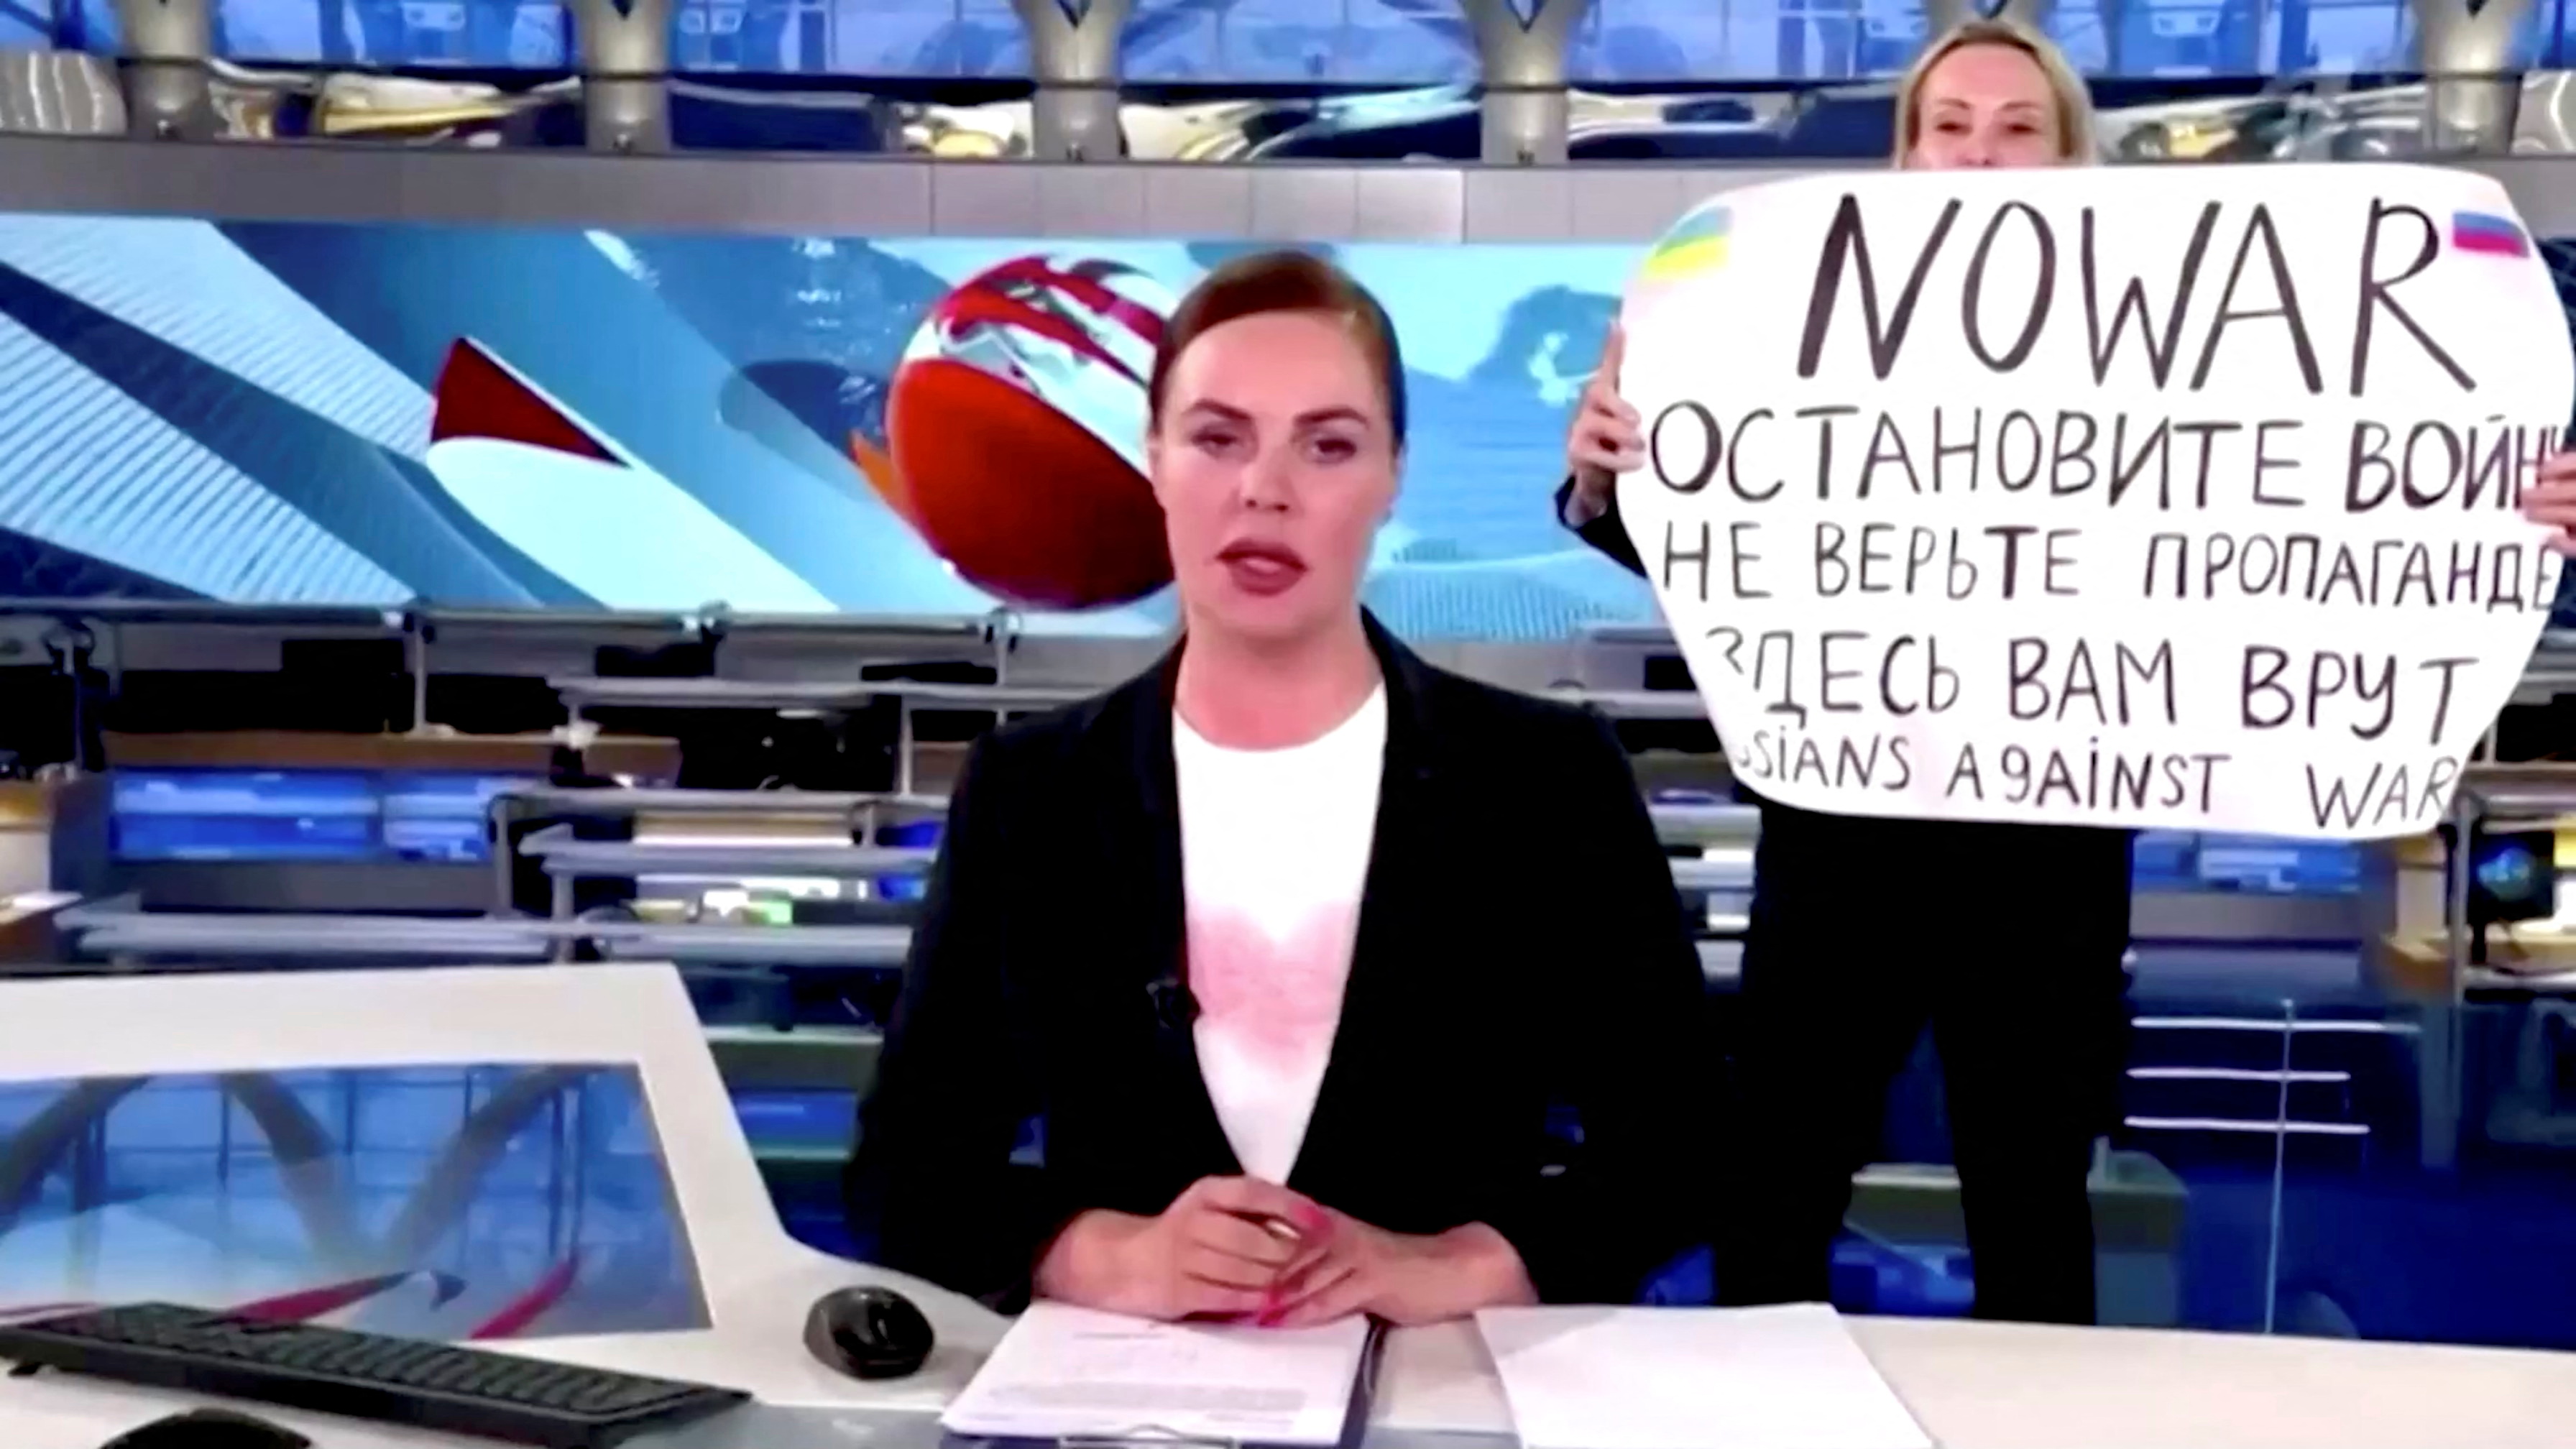 Anti-war protester disrupts live Russian state TV news, in Russia